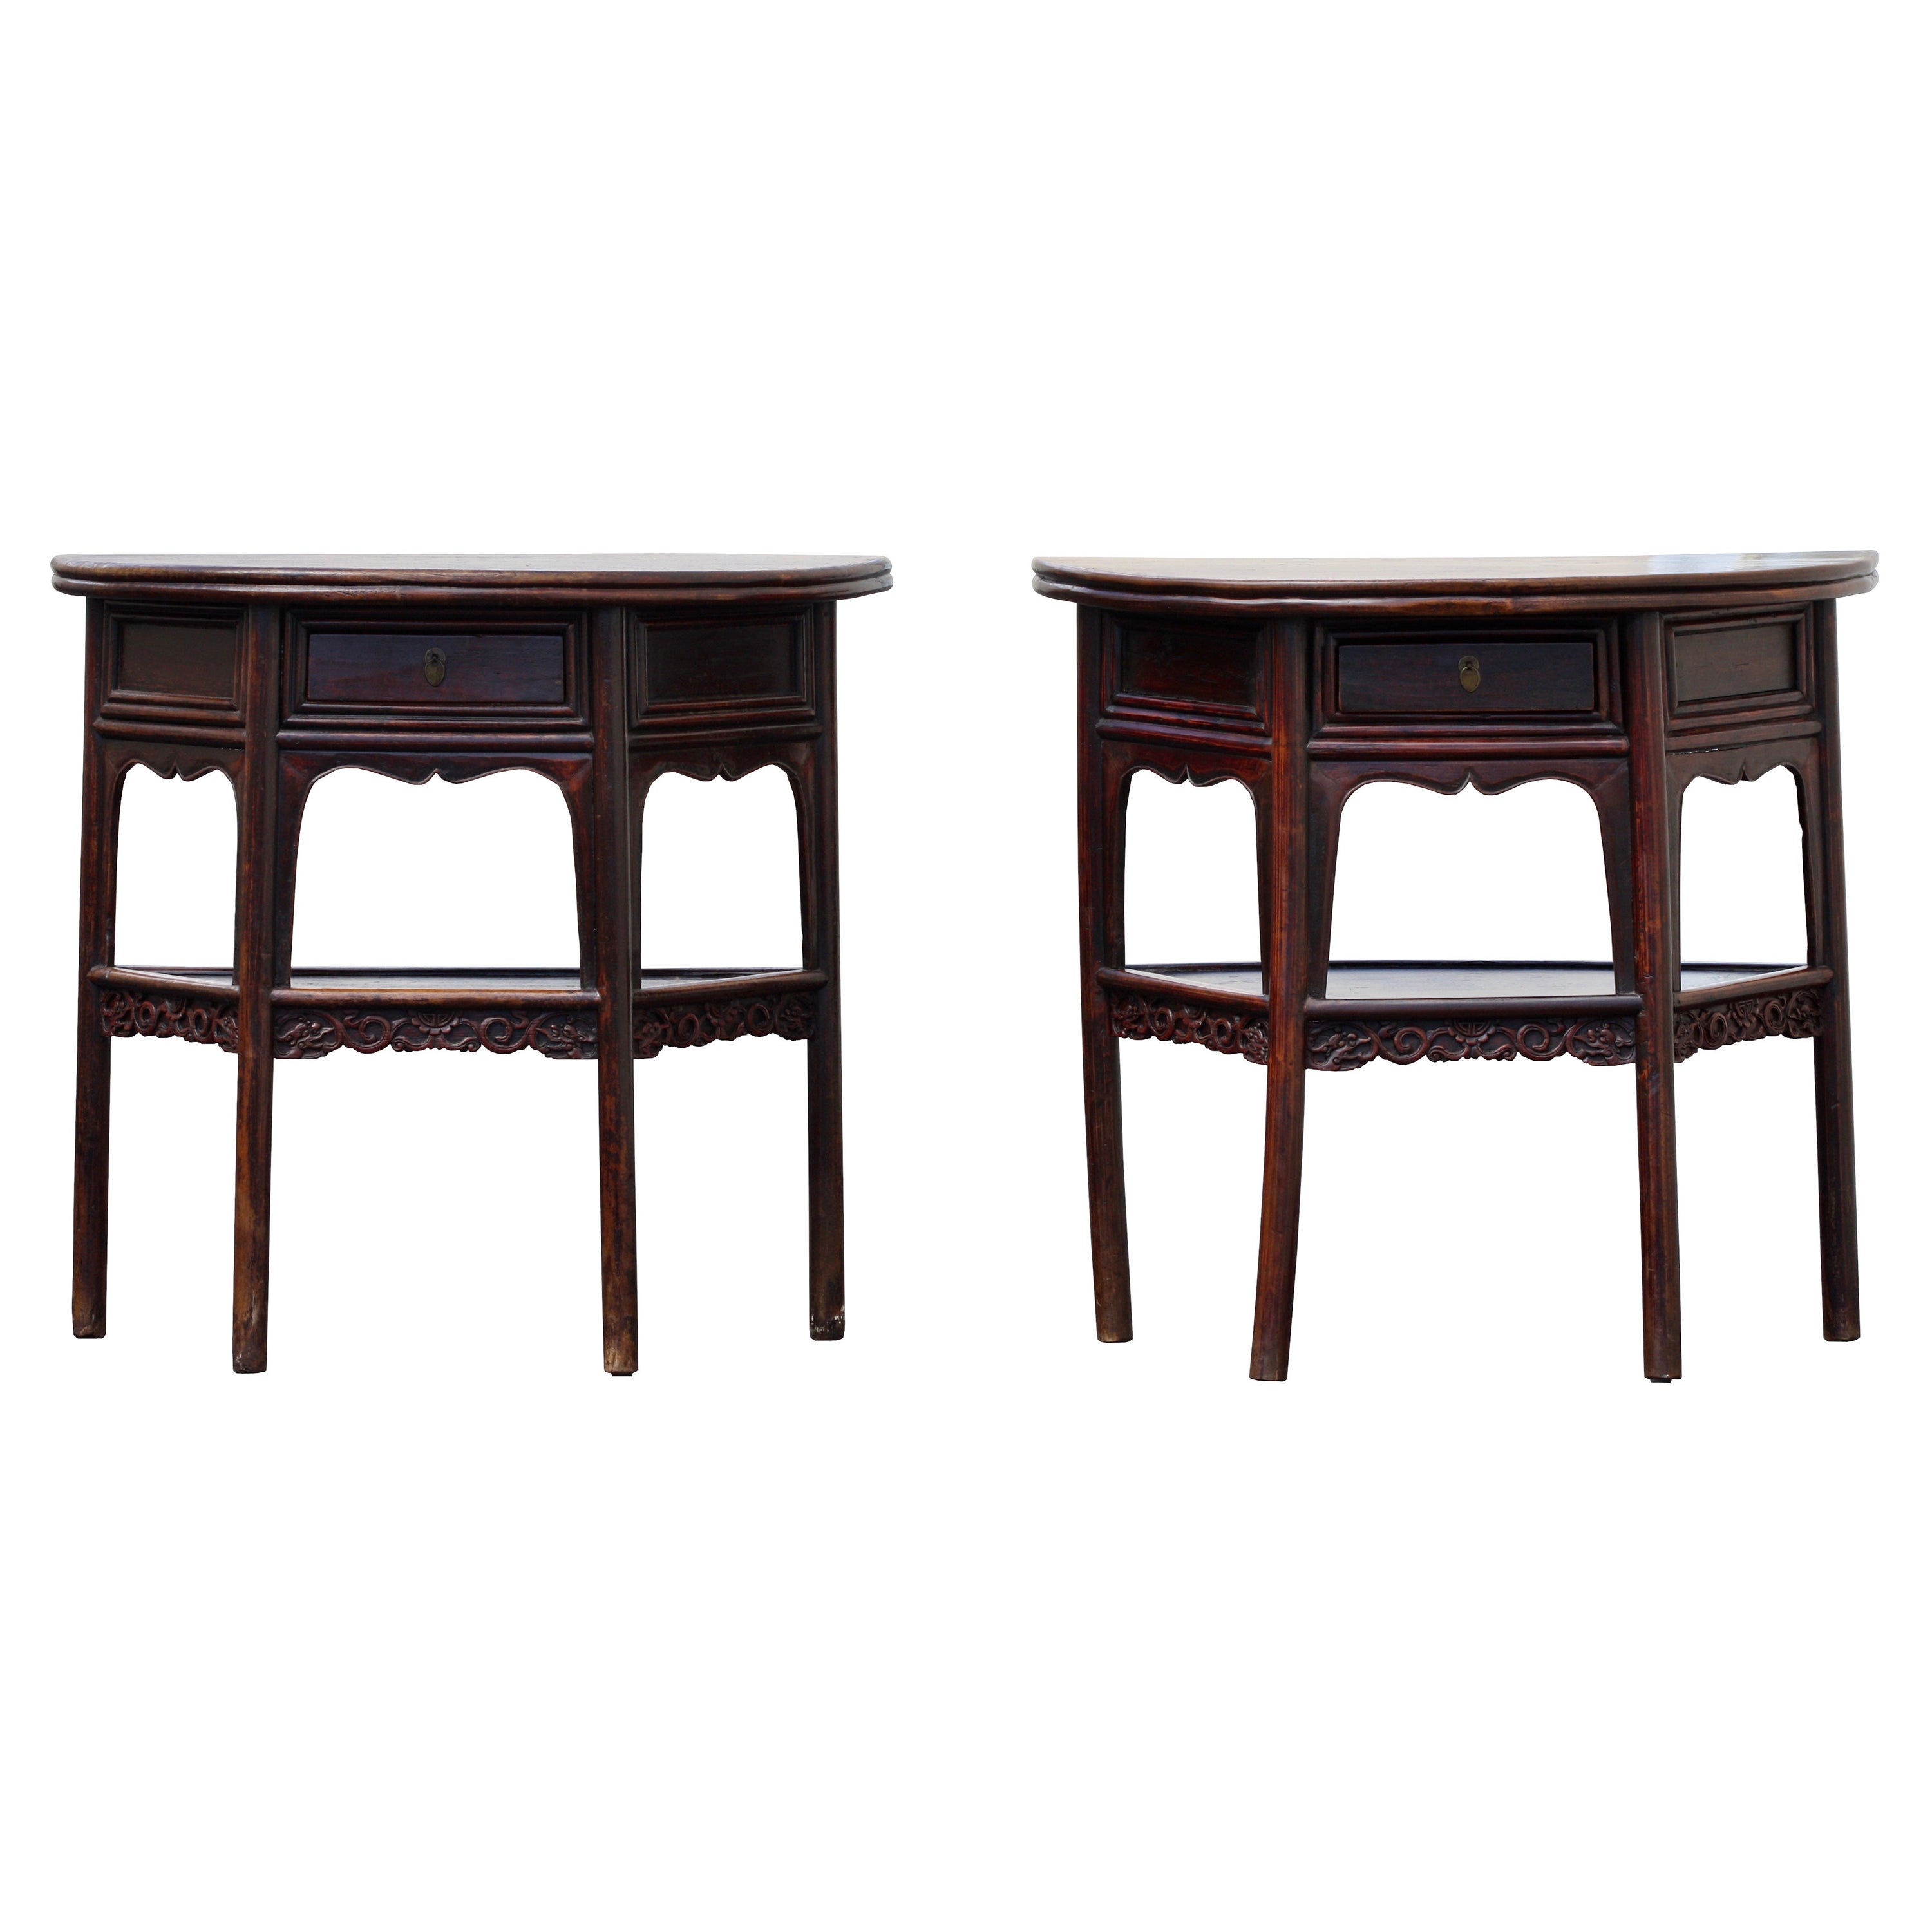 Most Attractive Pair of 18th Century Chinese Demi-Lune Tables